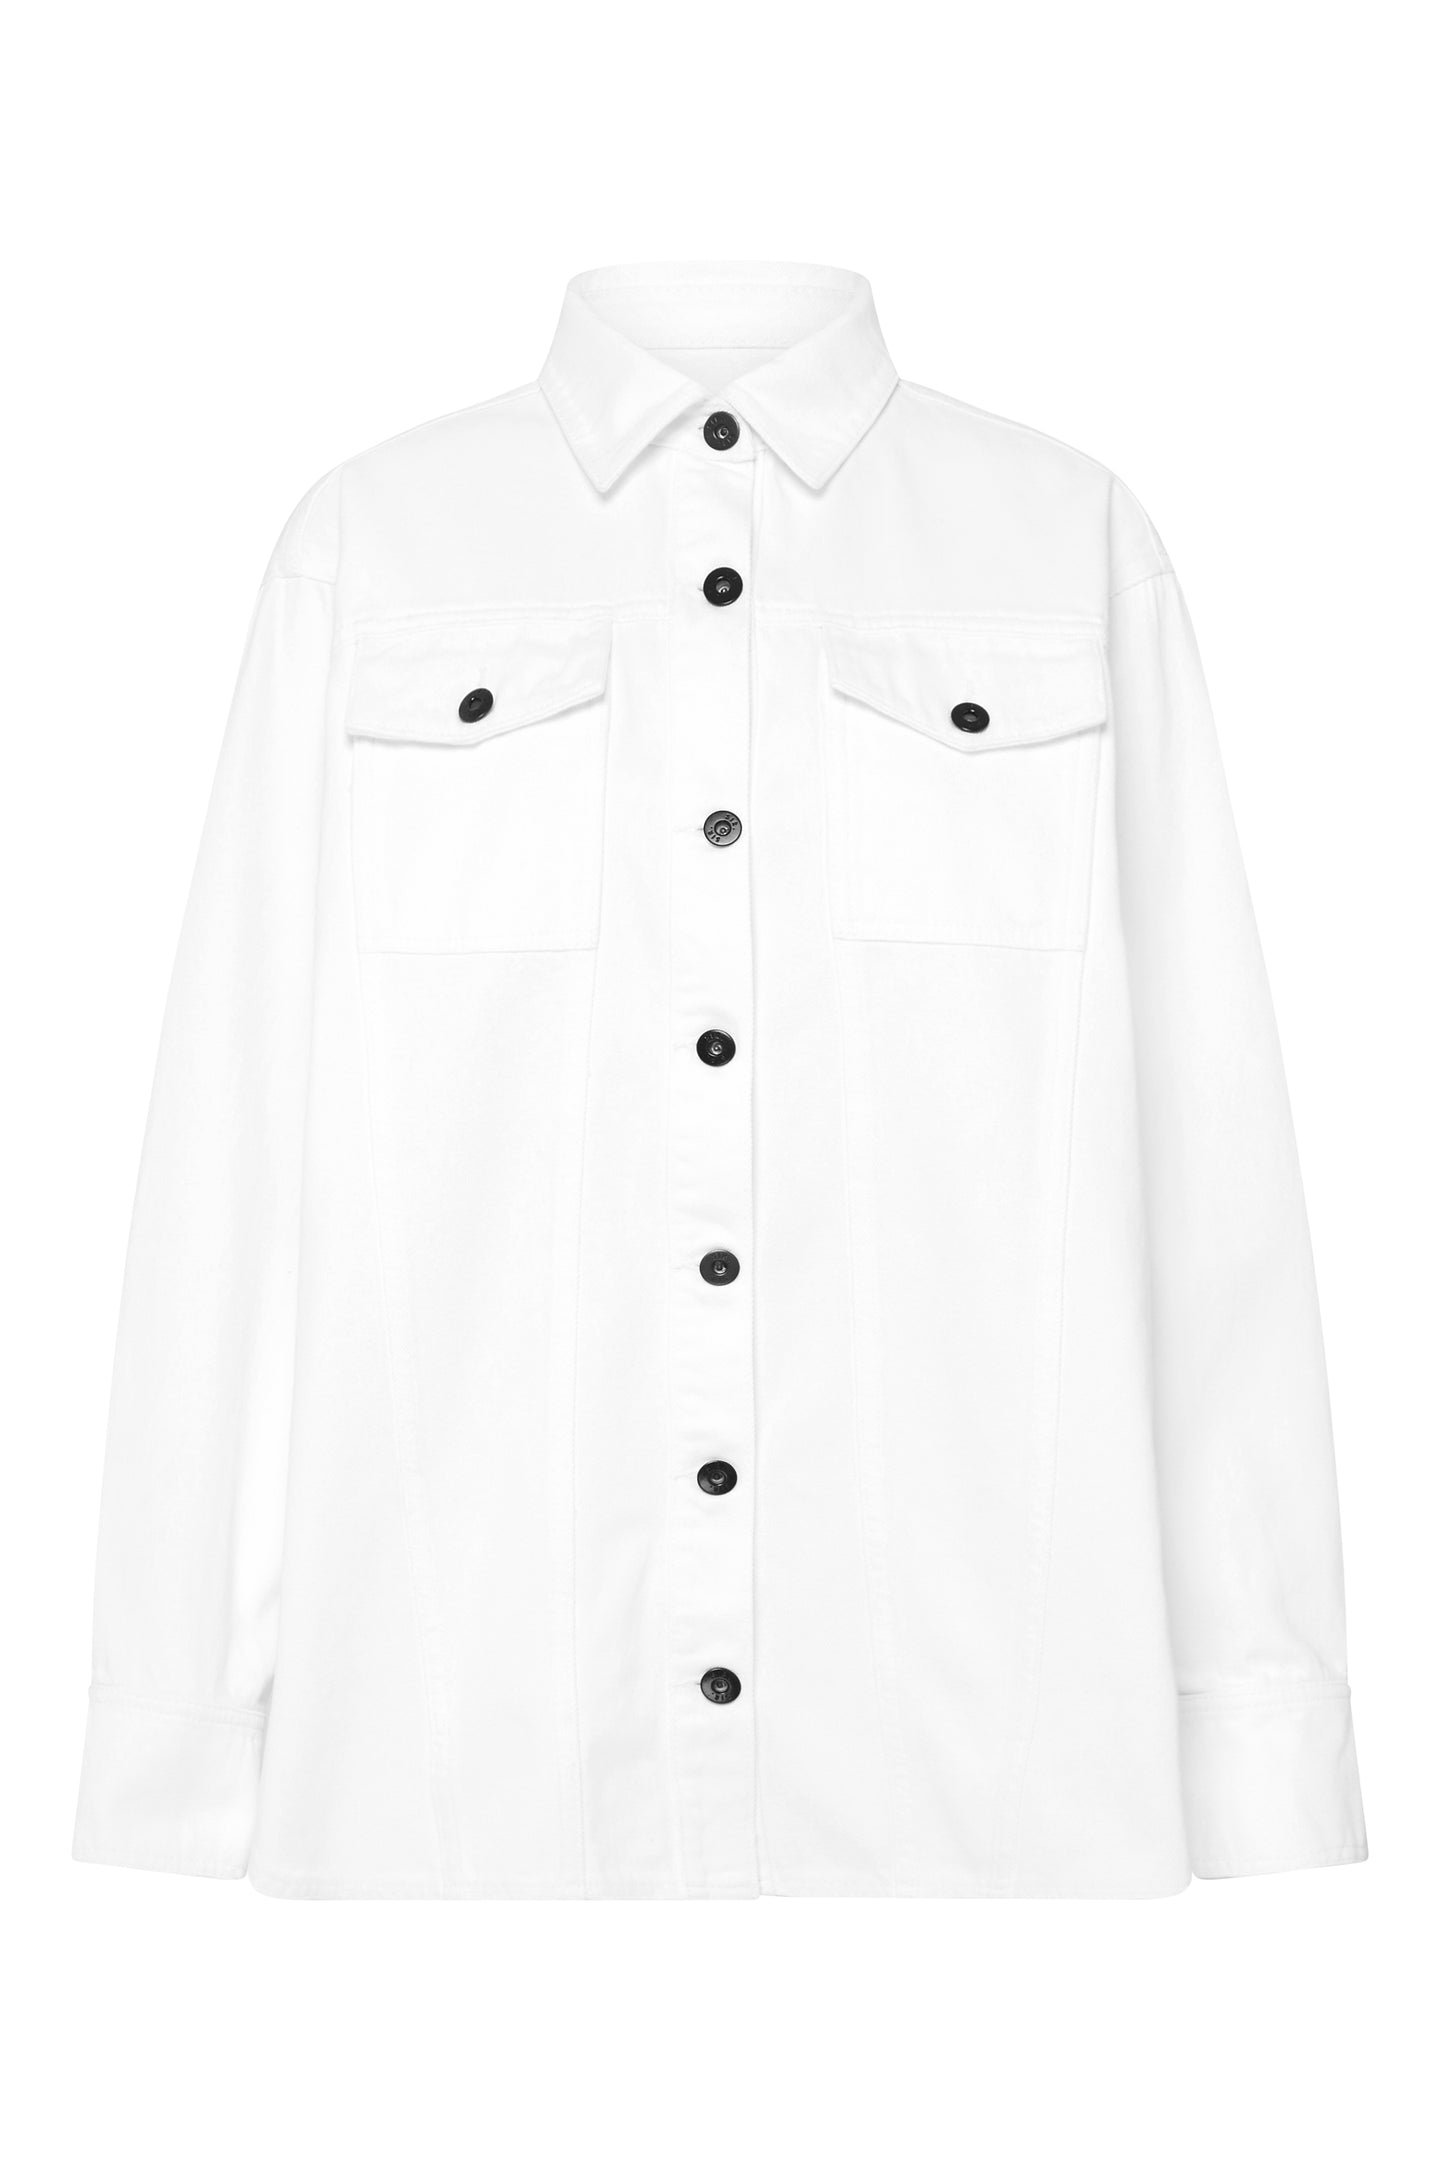 SIR the label CLASSIC SHIRT WHITE